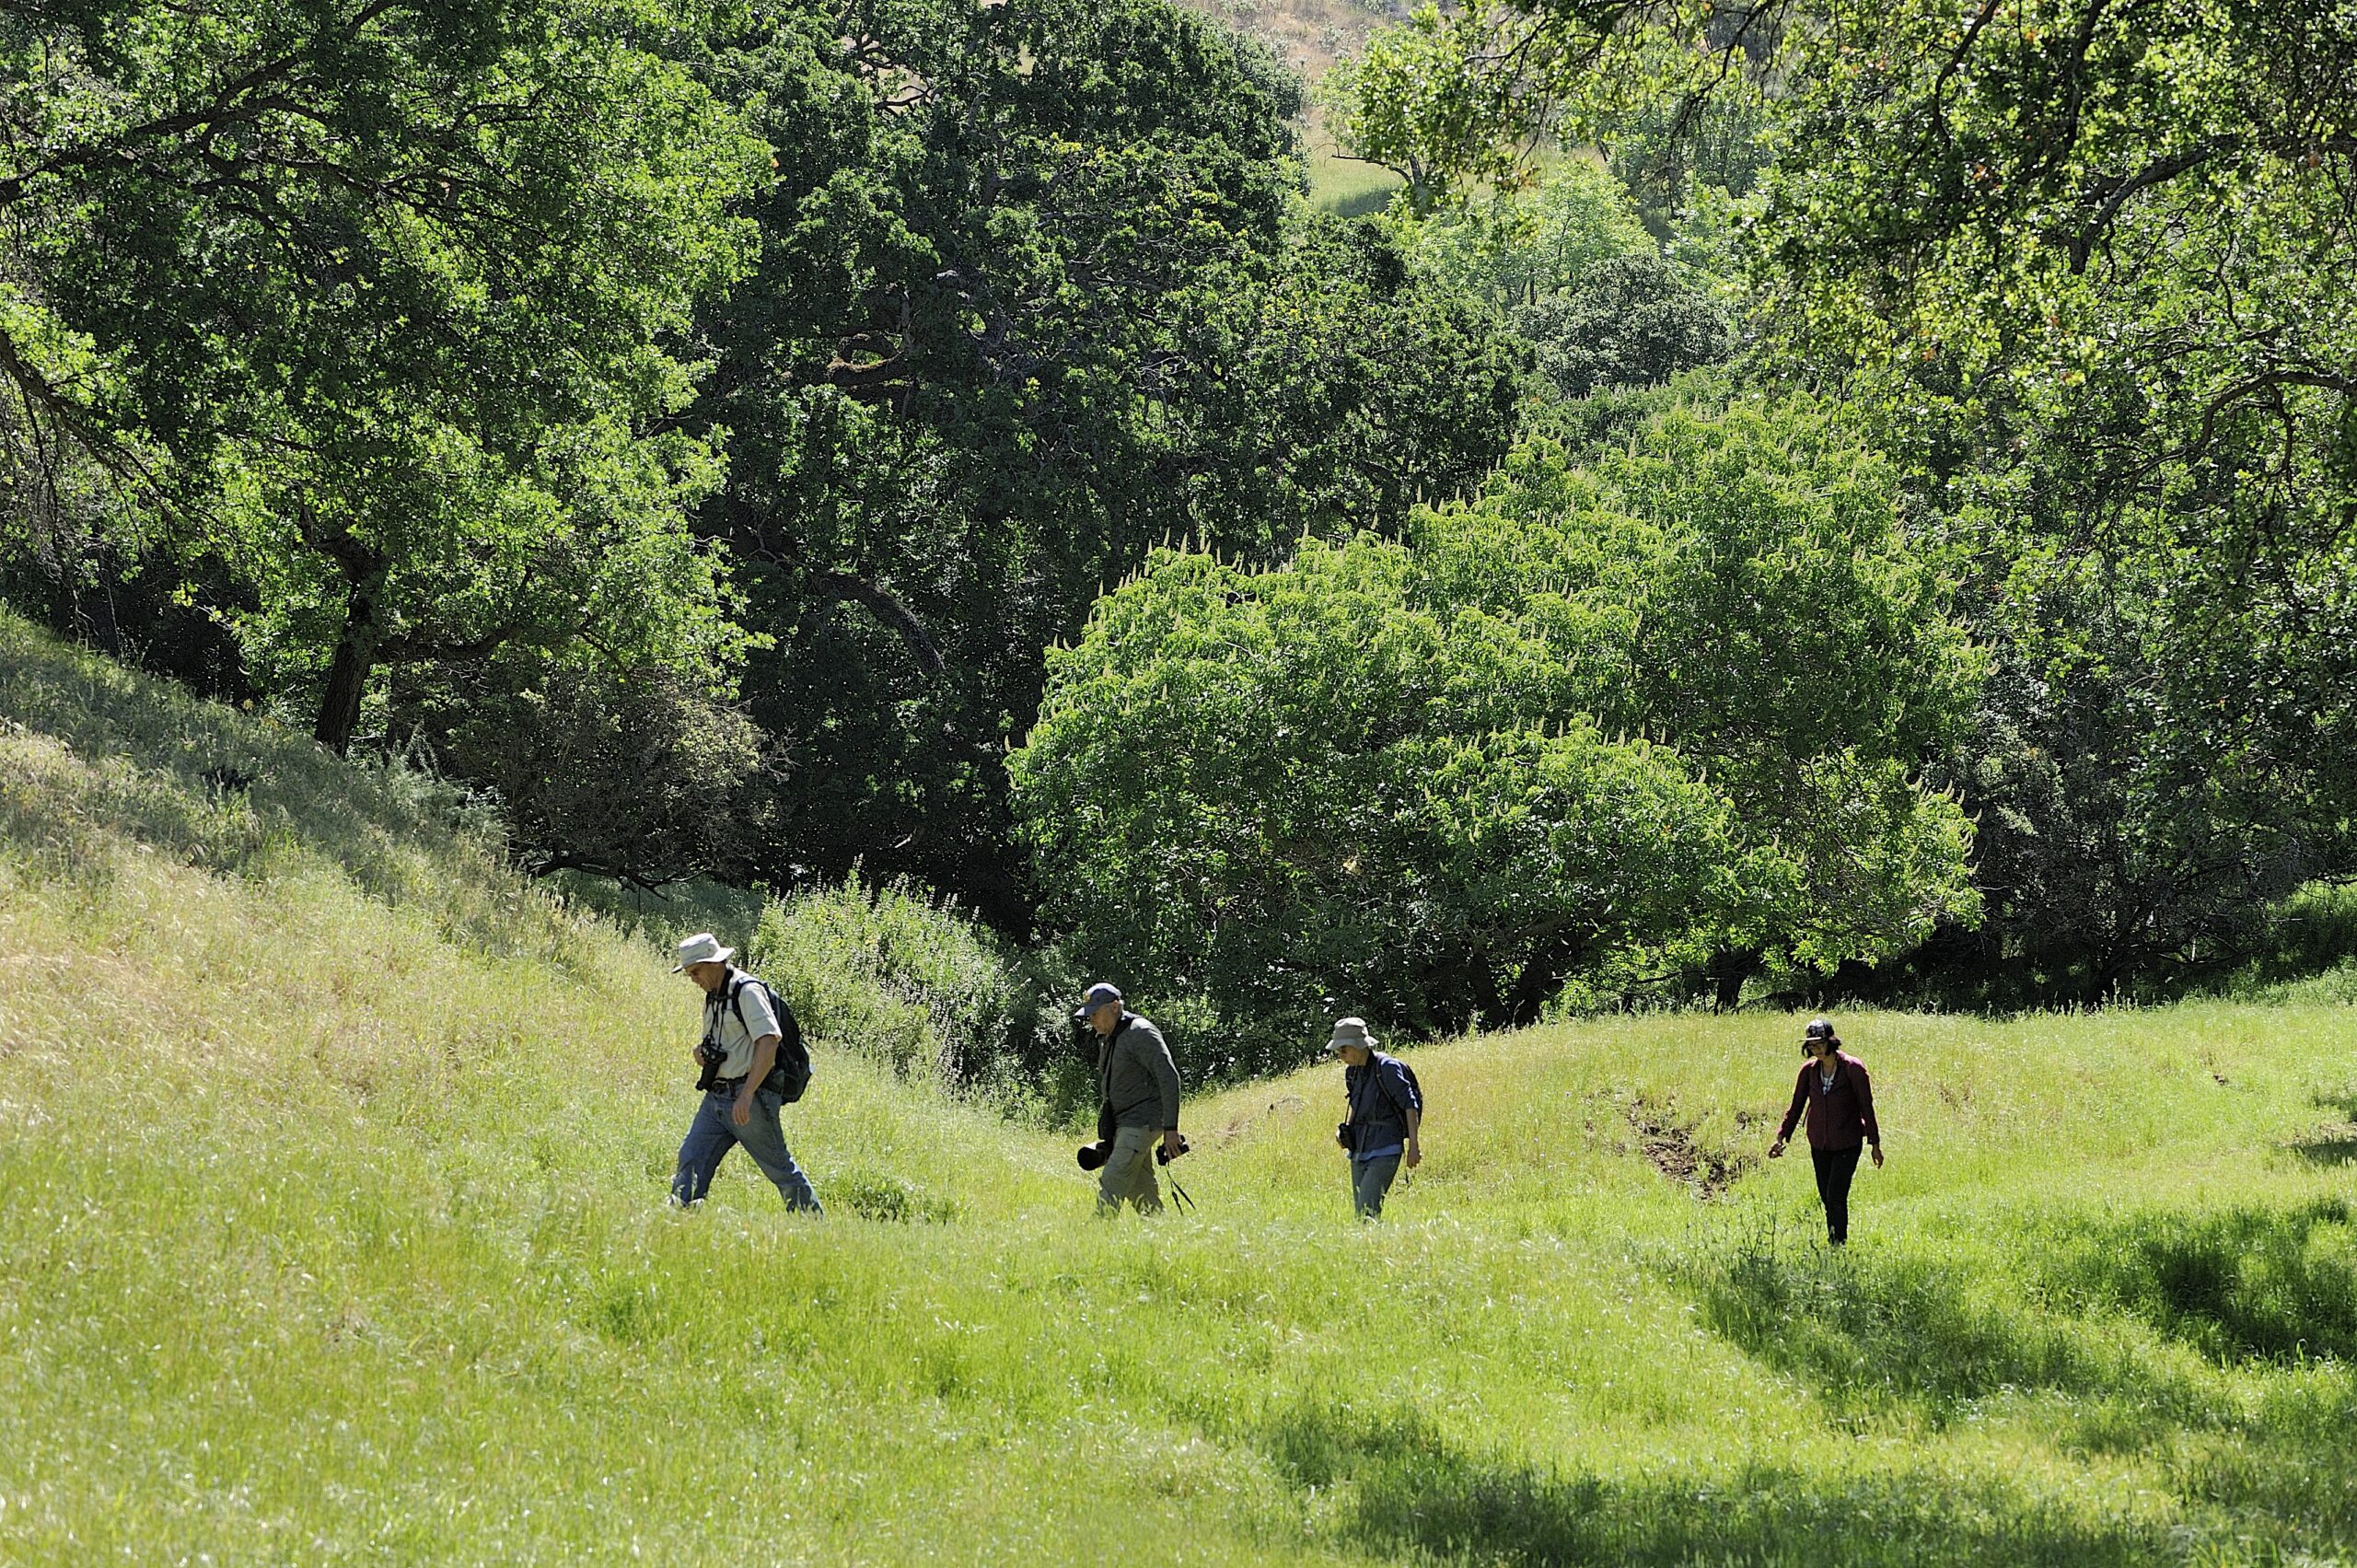 Hikers in ta secluded preserve